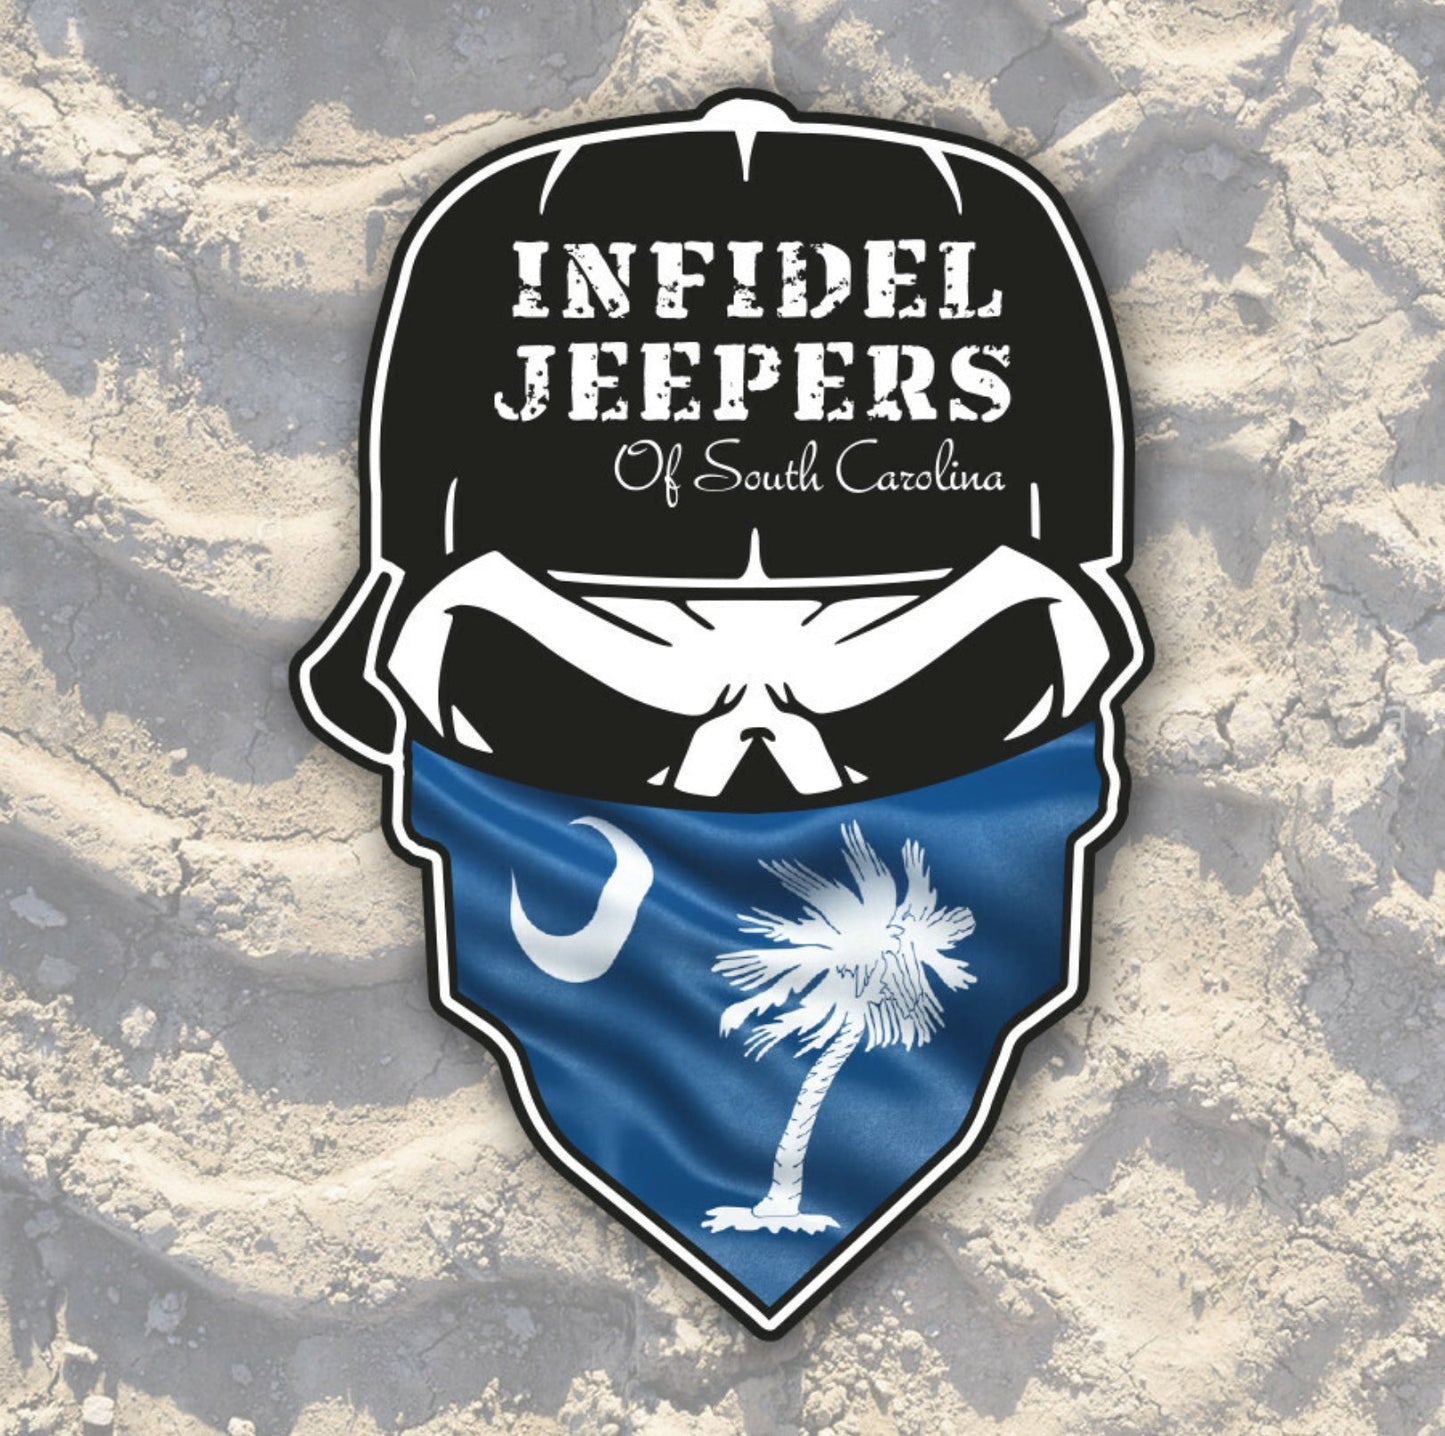 IJ CHAPTER DECALS (4”H x 2.5”W)